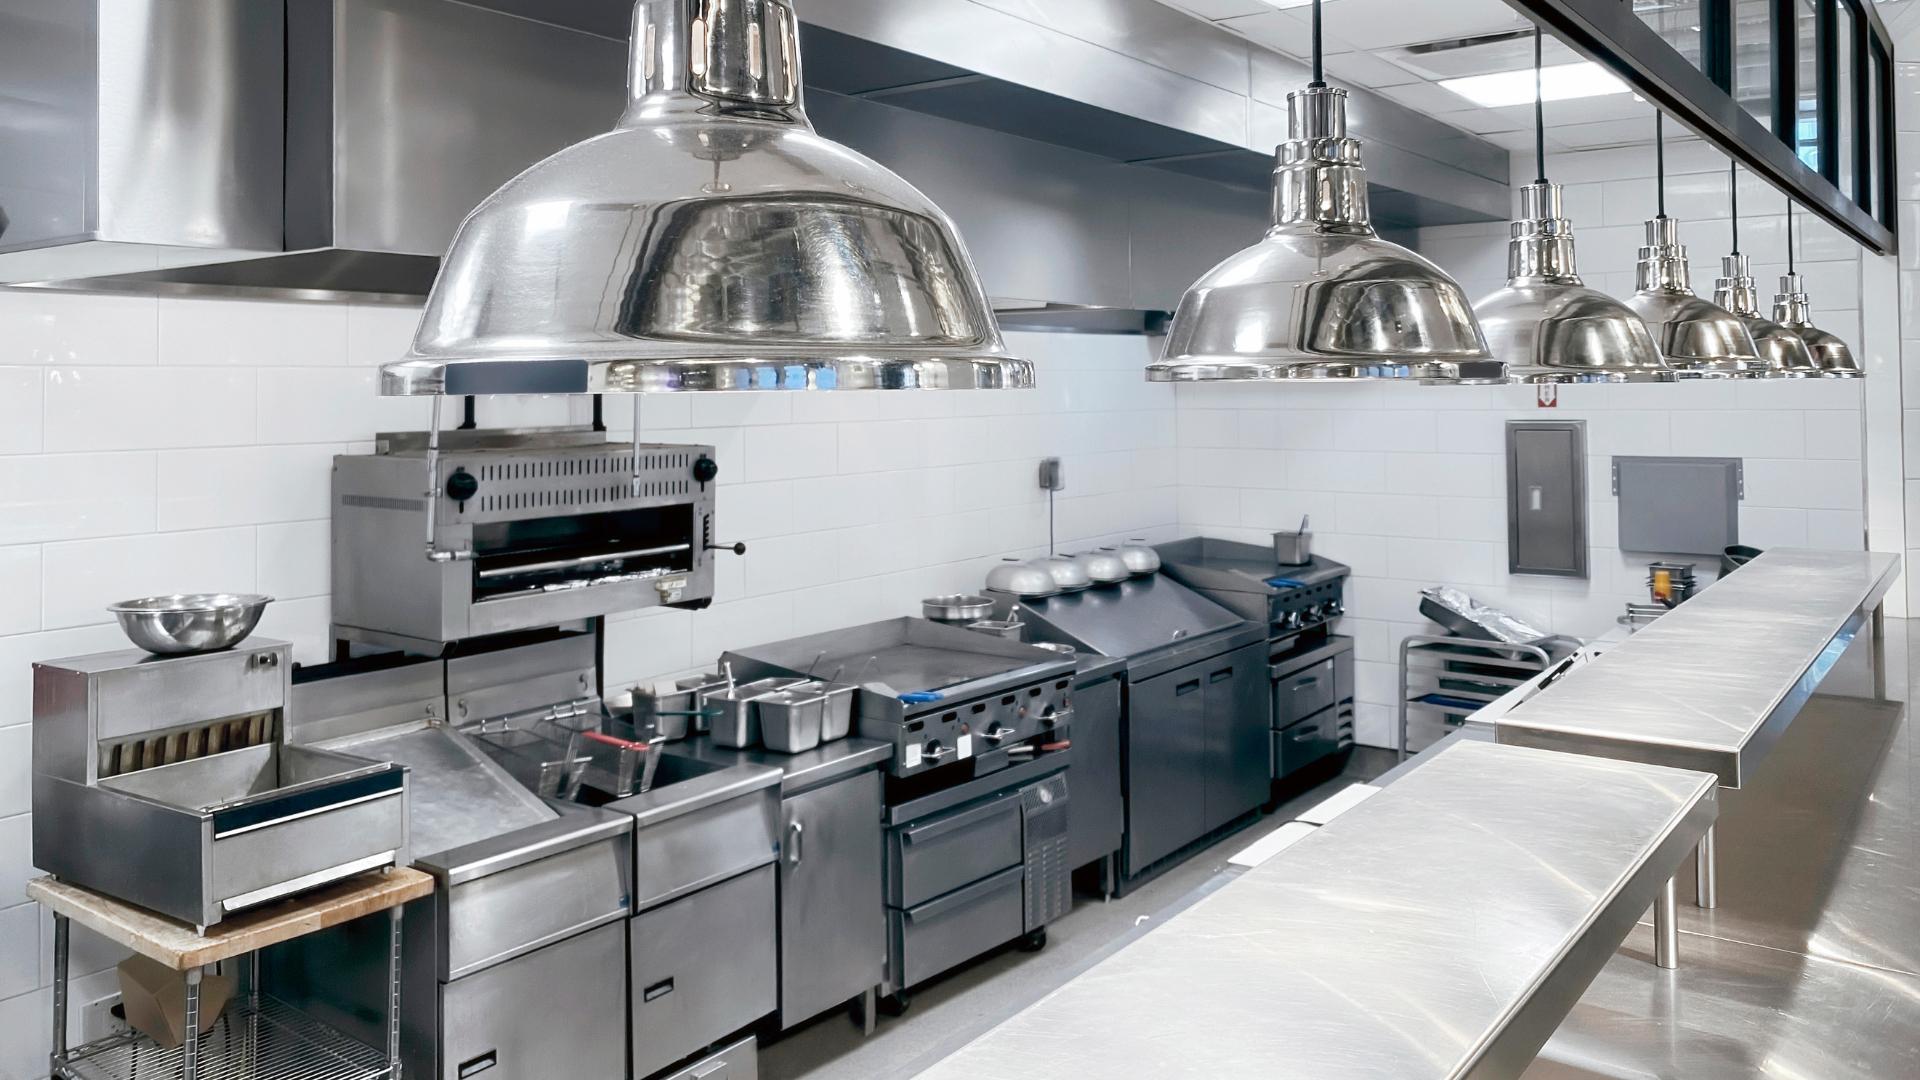 Fully equipped restaurant kitchen